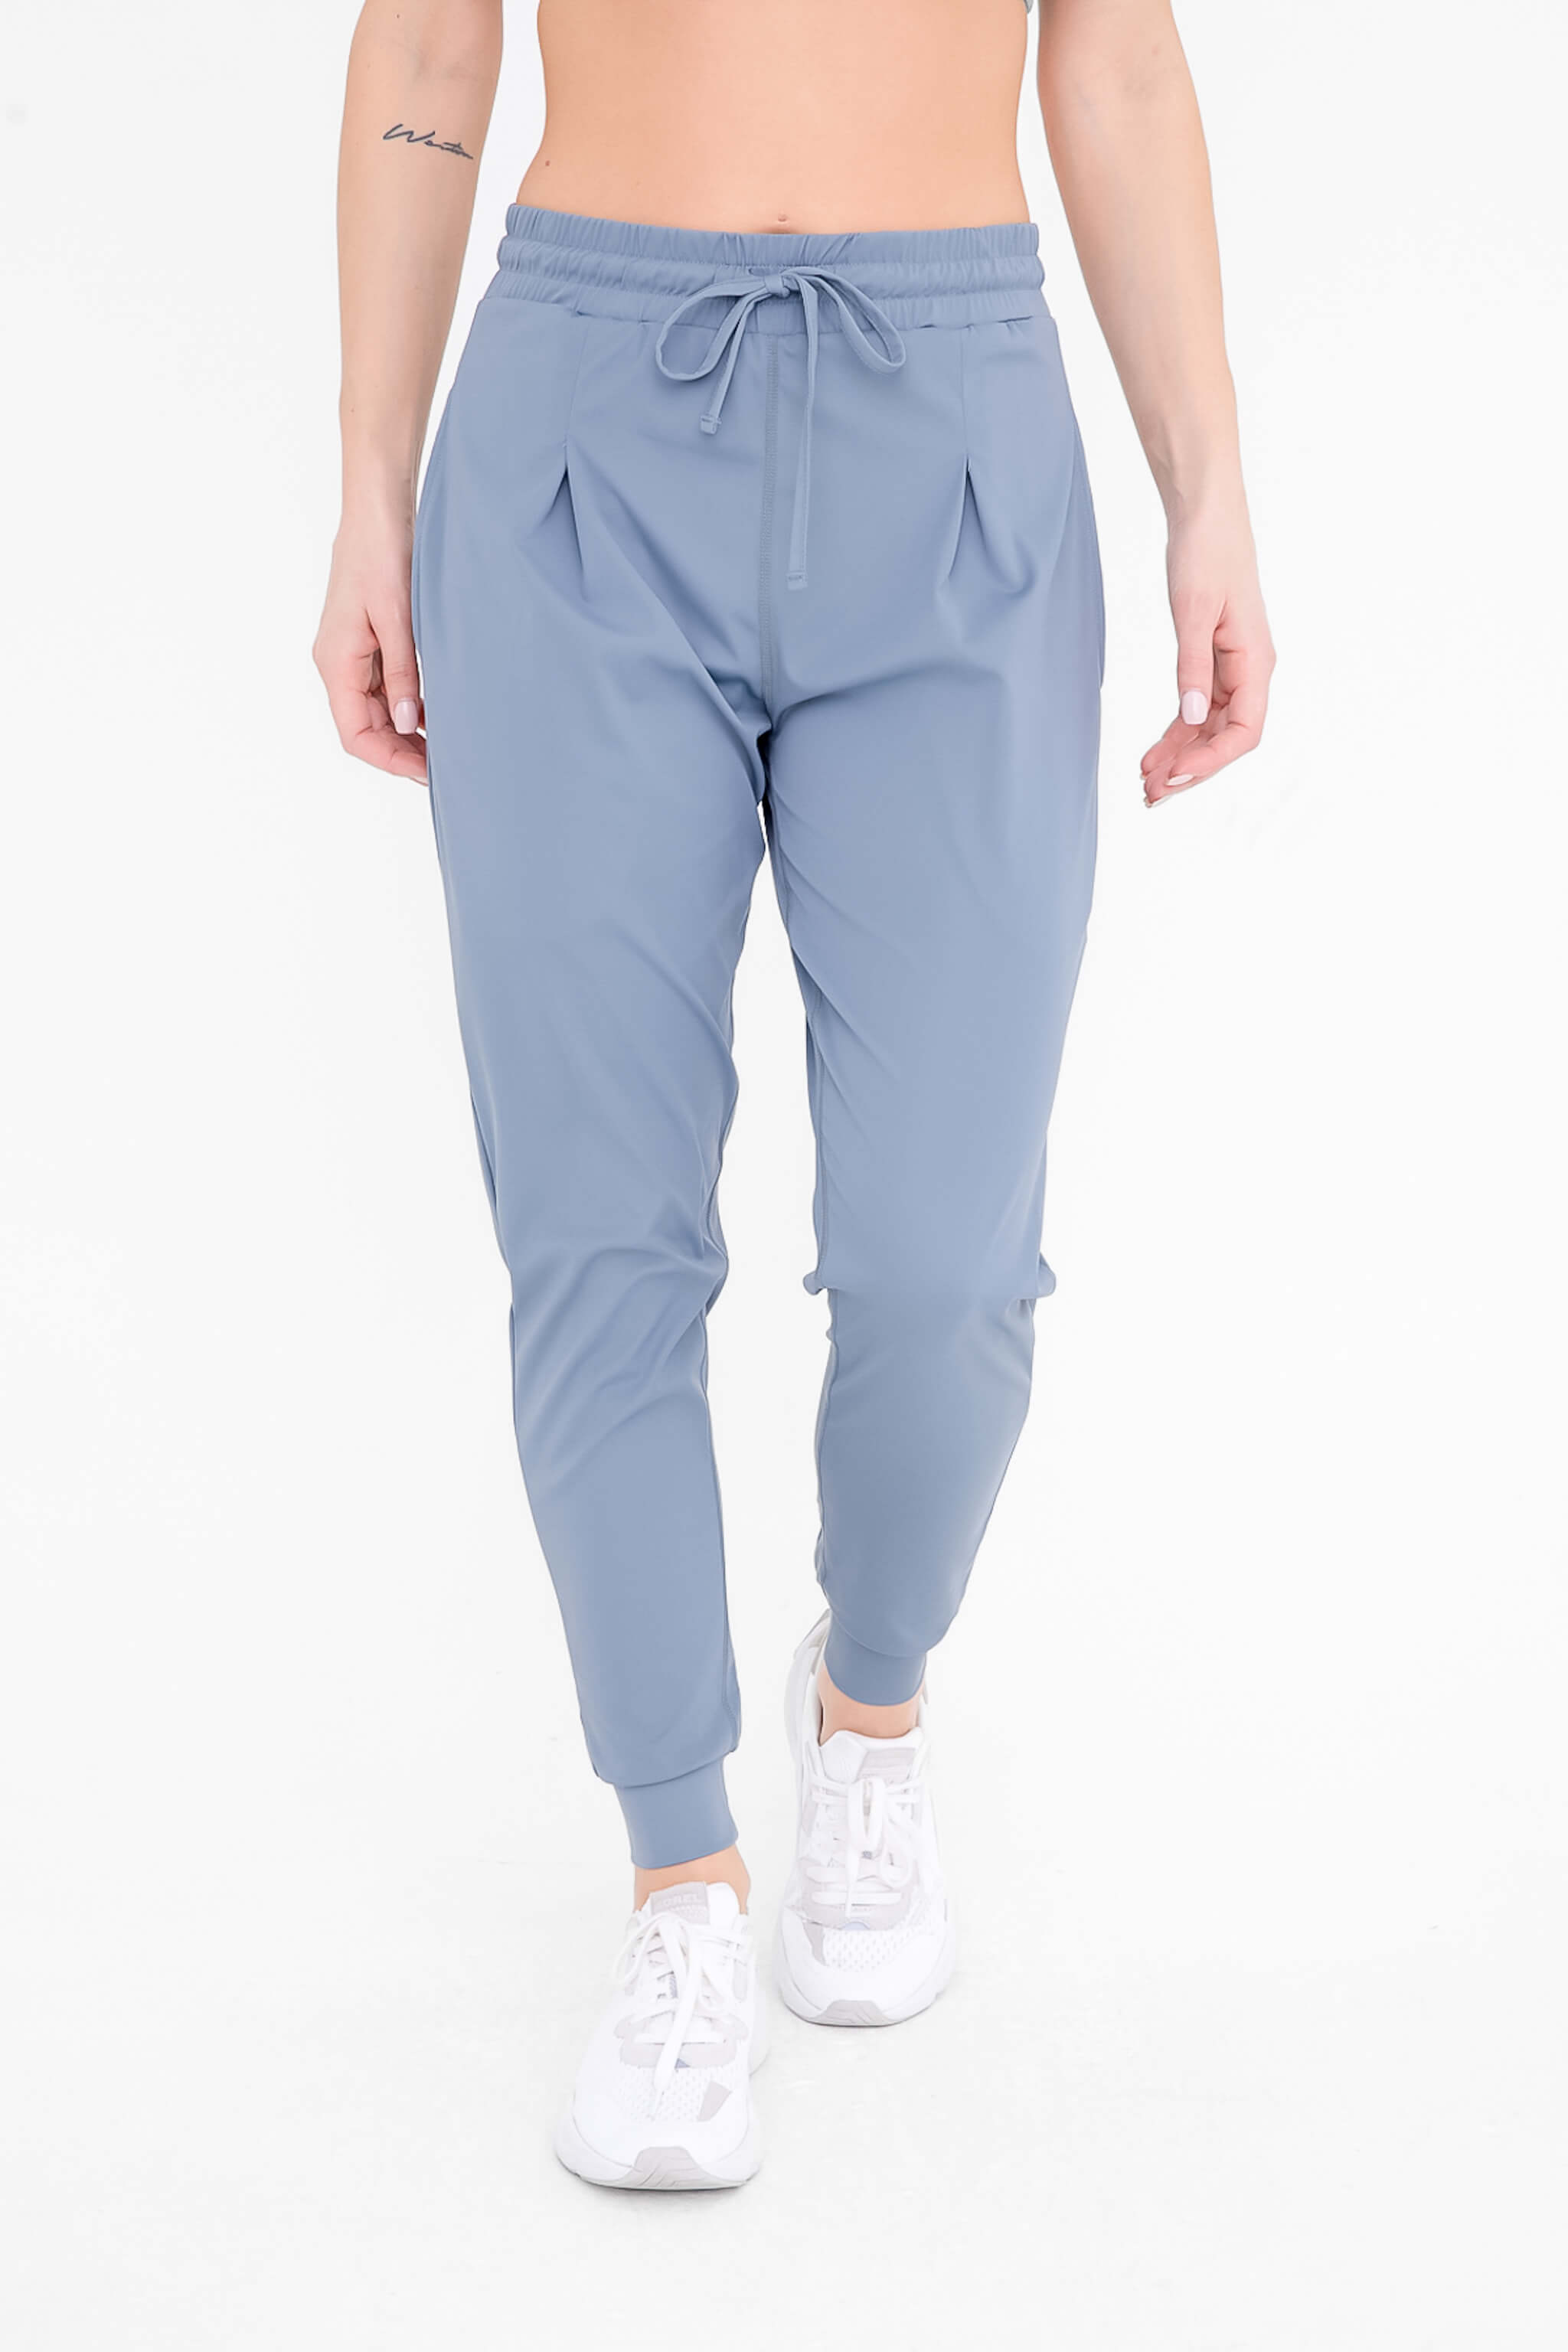 SOLID PLEATED FRONT JOGGERS - RK010